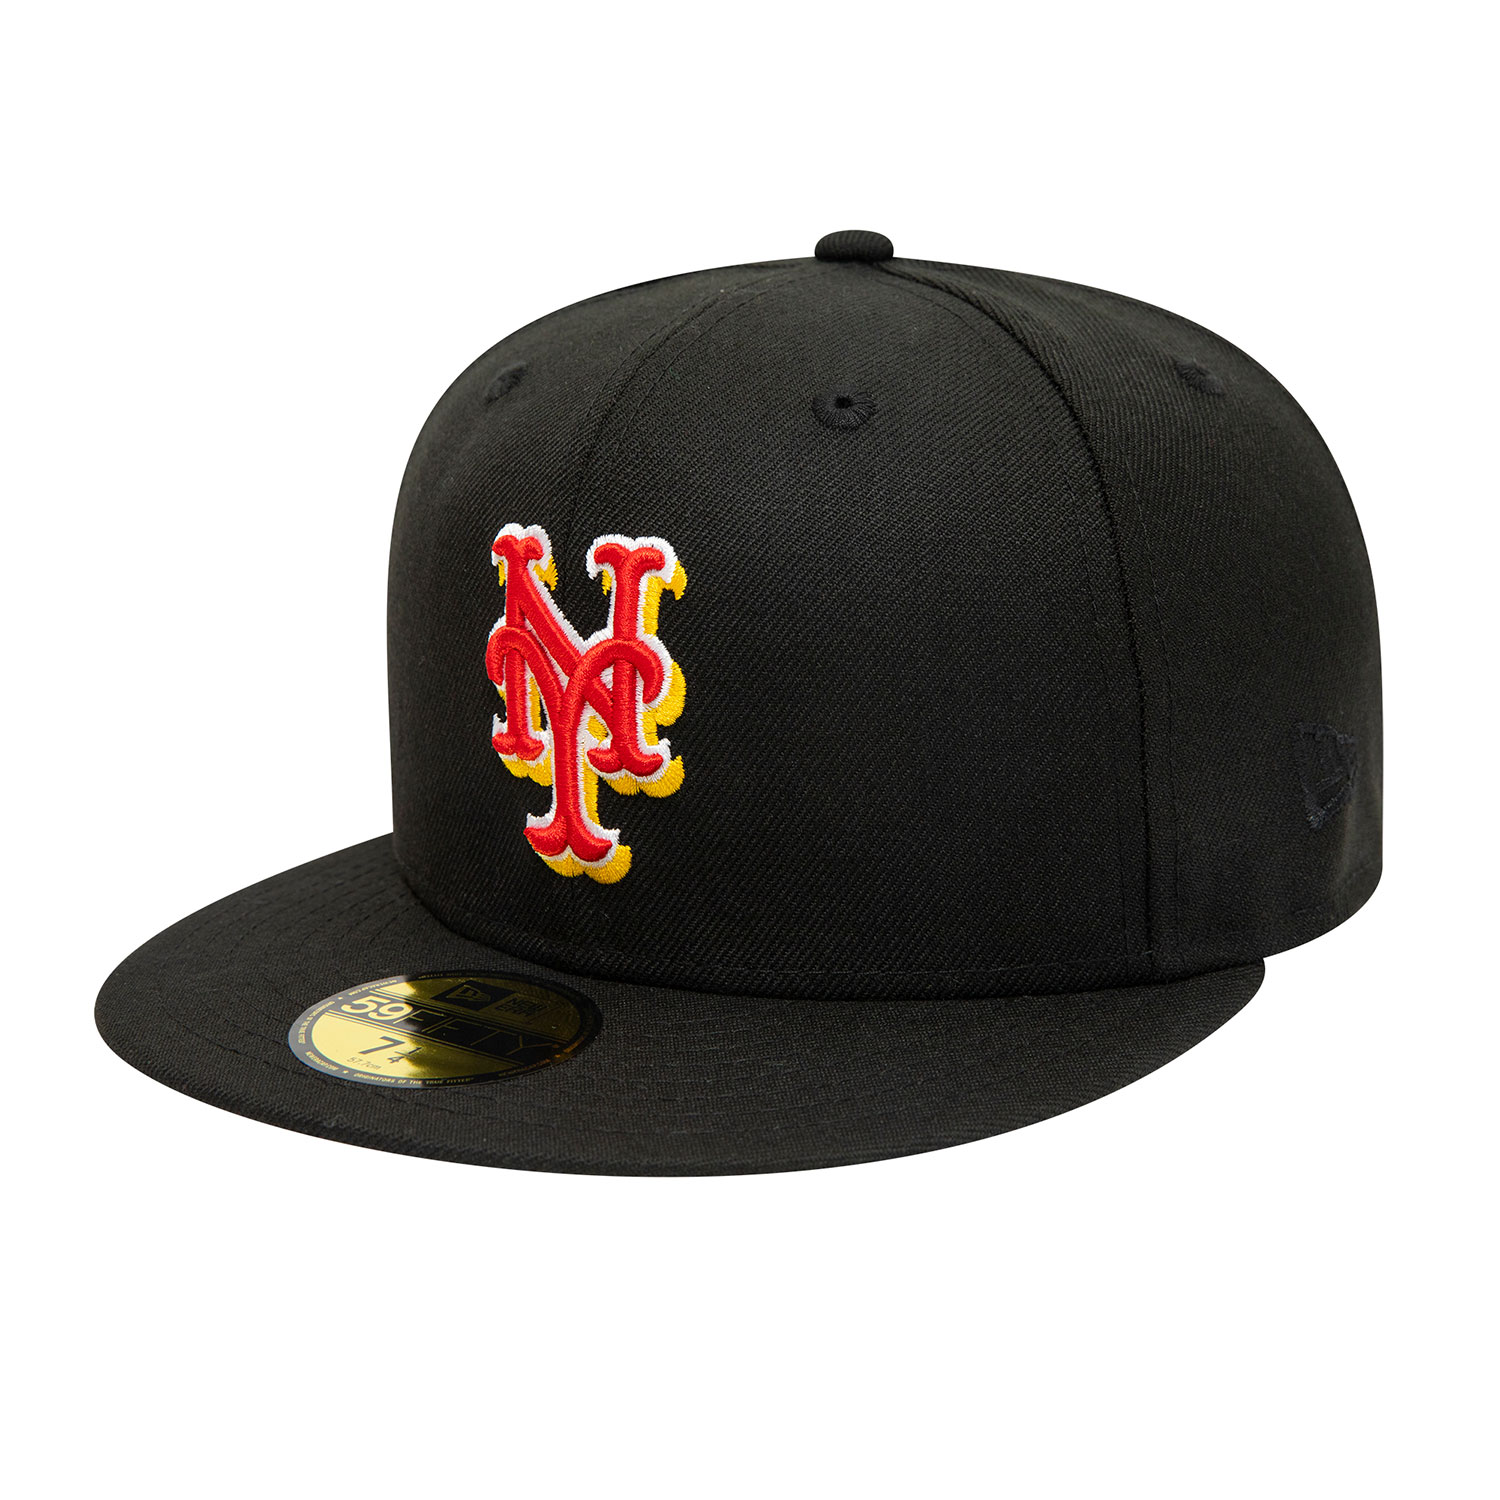 Official New Era New York Mets Mlb Black 59fifty Fitted Cap B8088 281 New Era Cap Poland